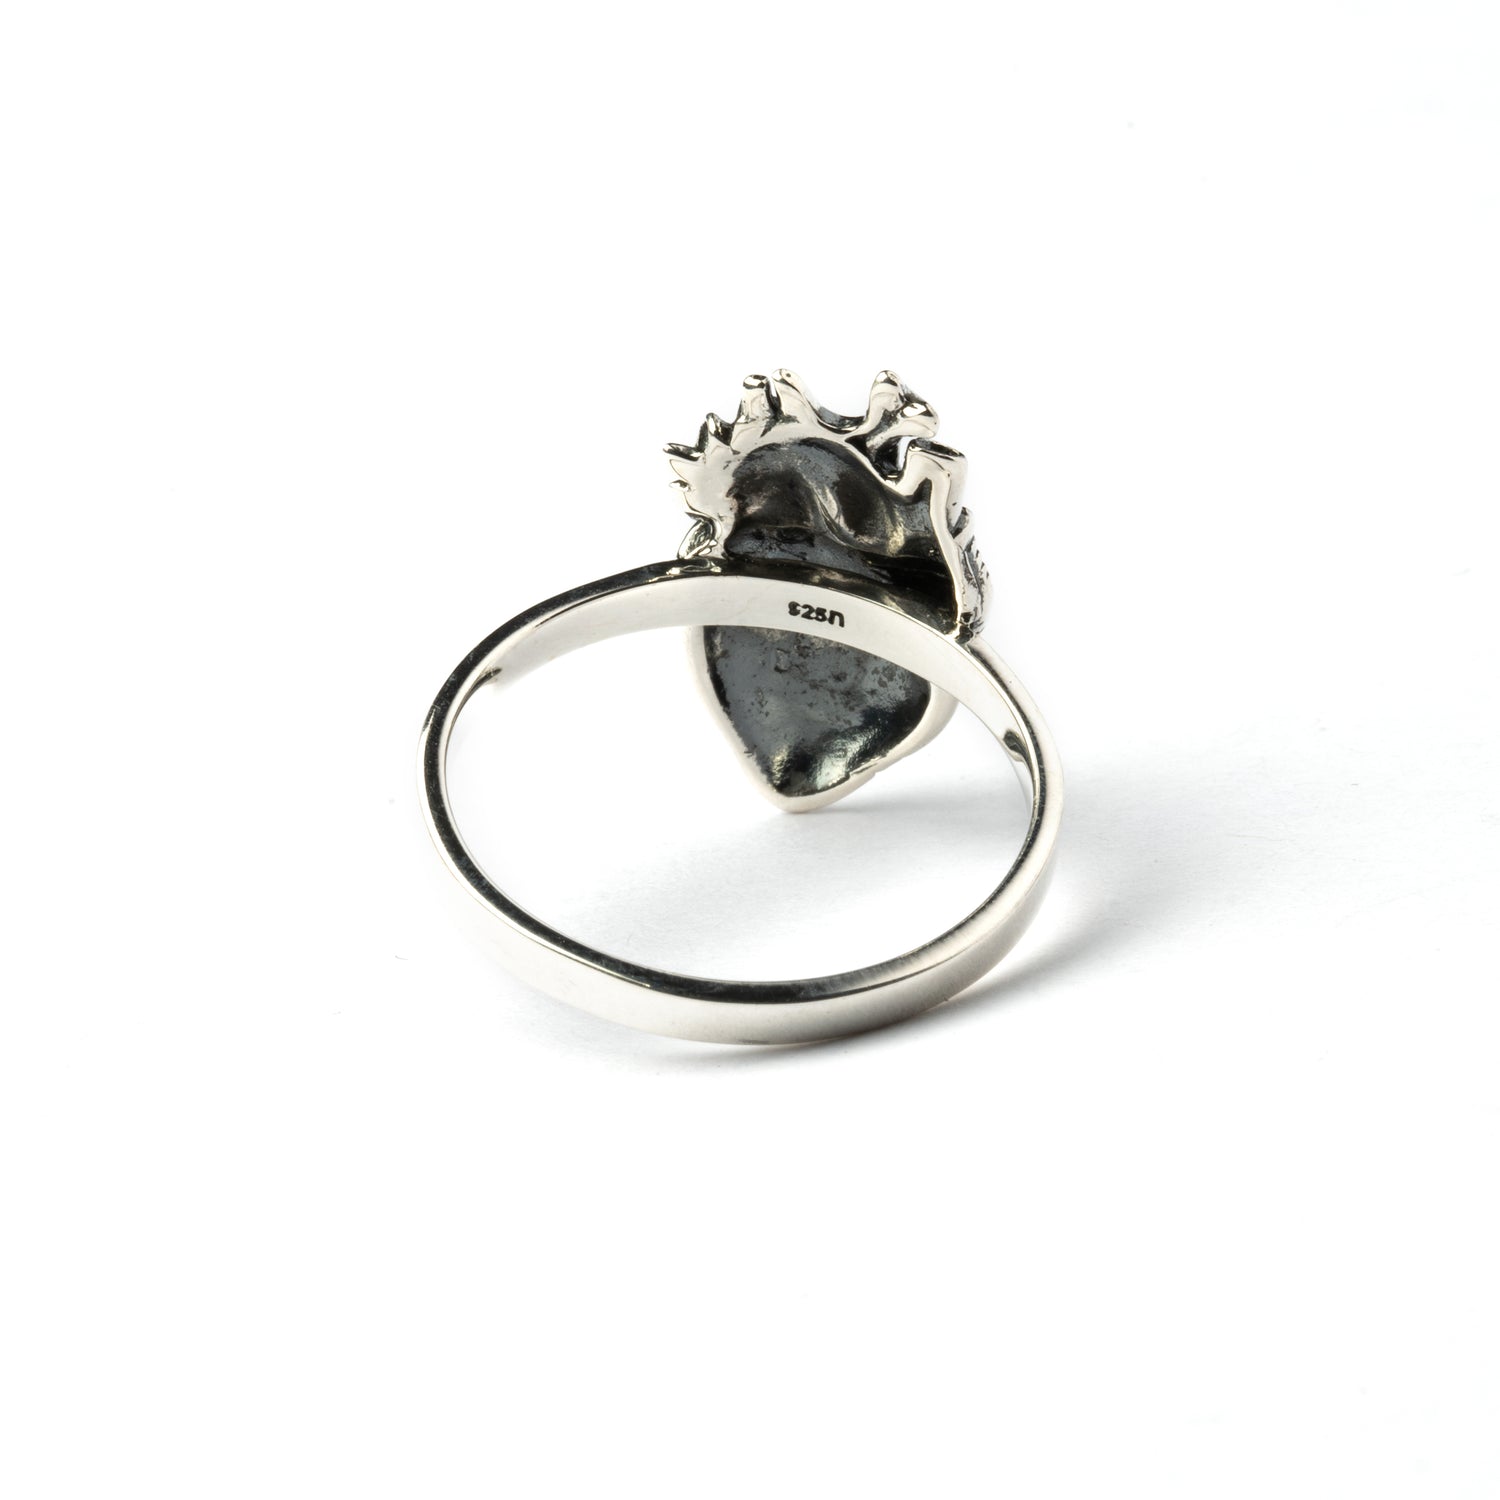 Silver Anatomic Heart Ring back view